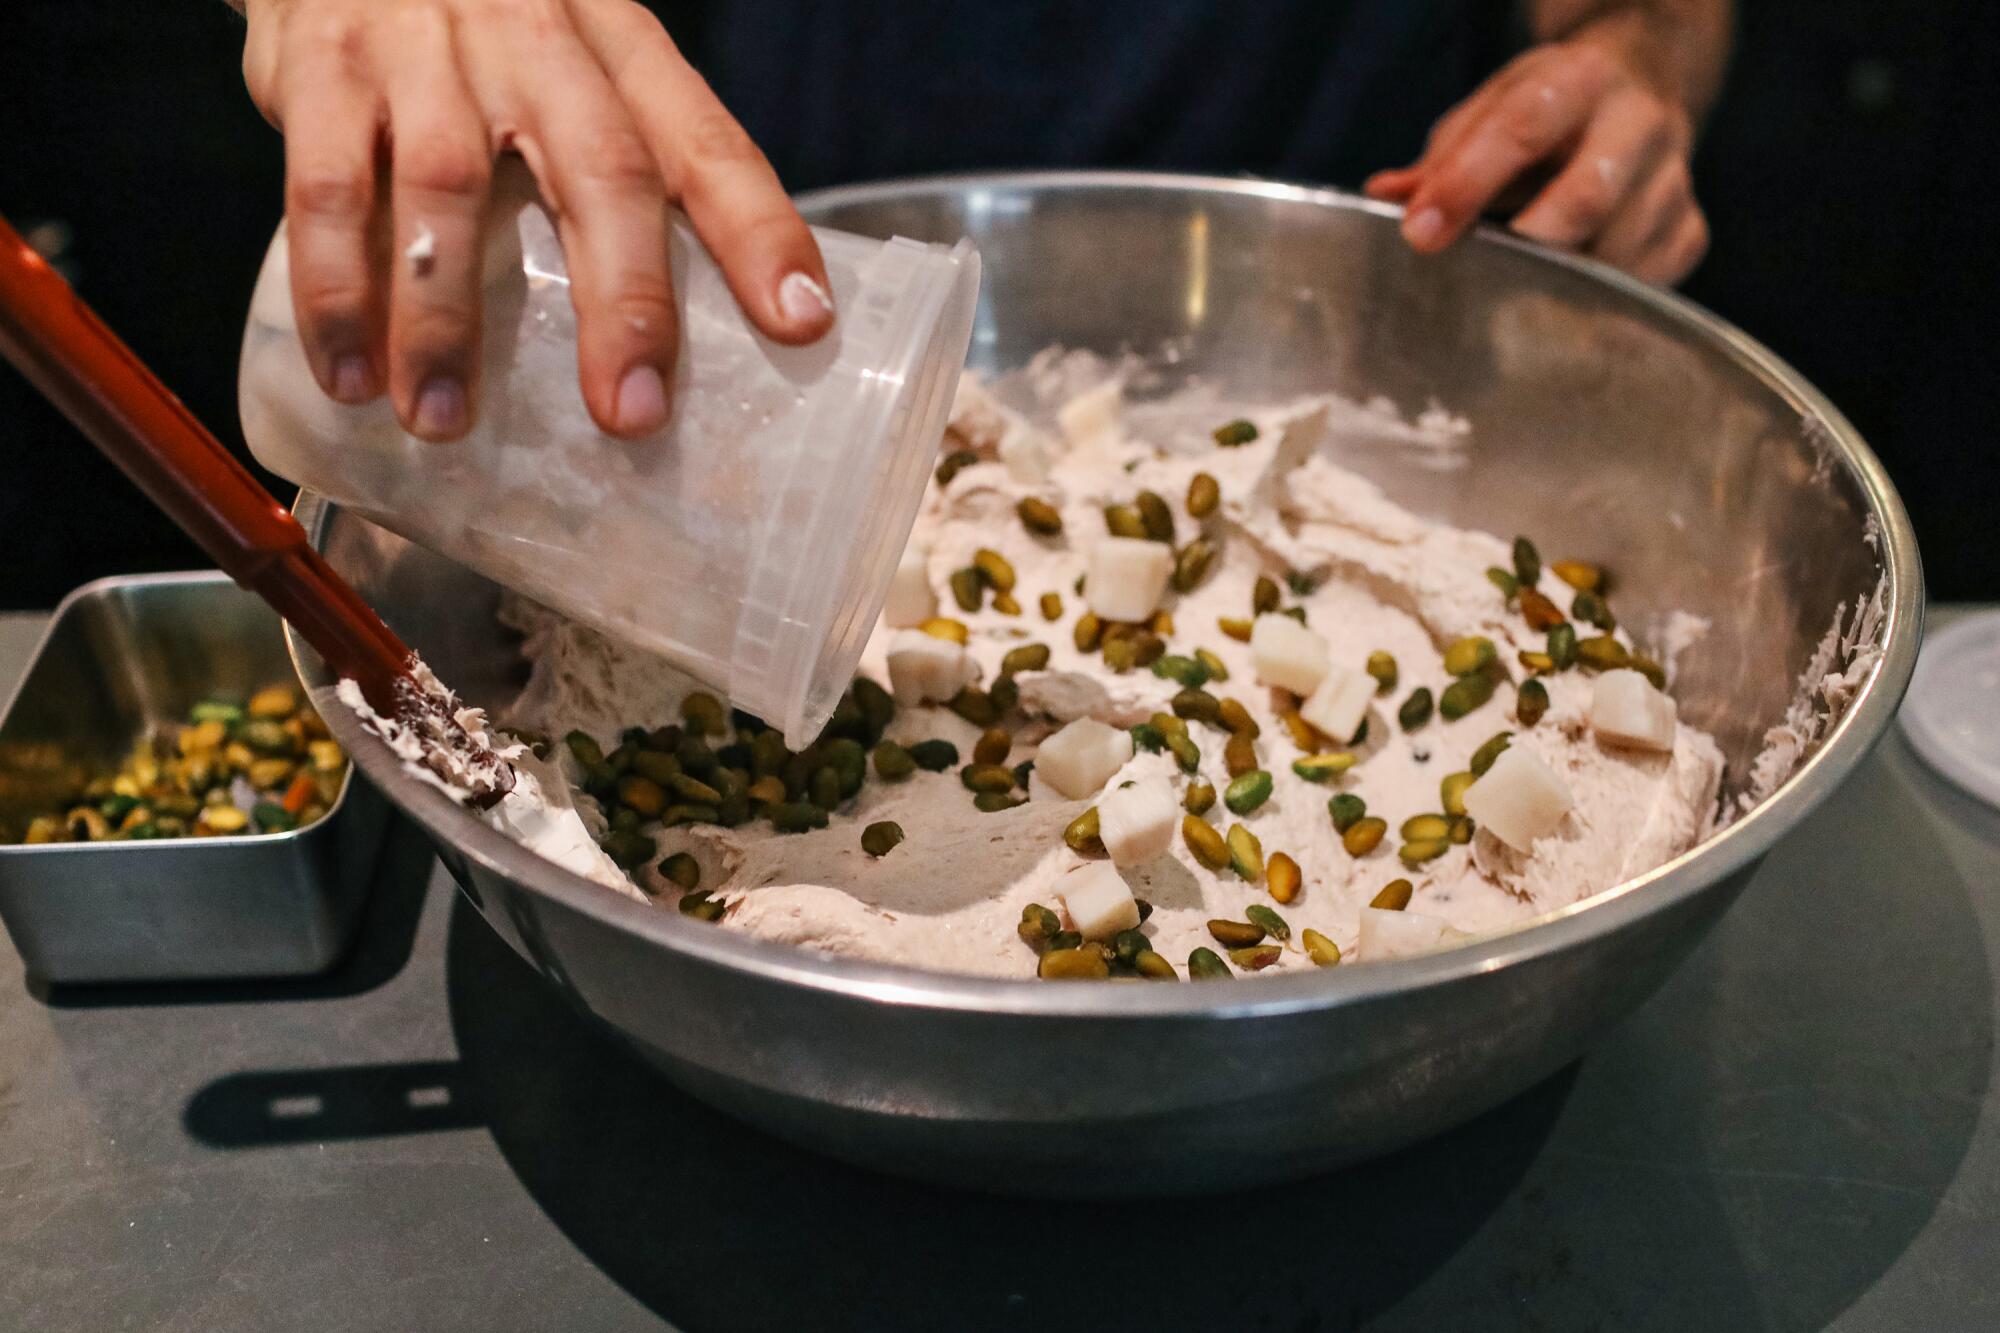 A hand pours a plastic cup of pork fat cubes and pistachios into the emulsified mortadella mix.